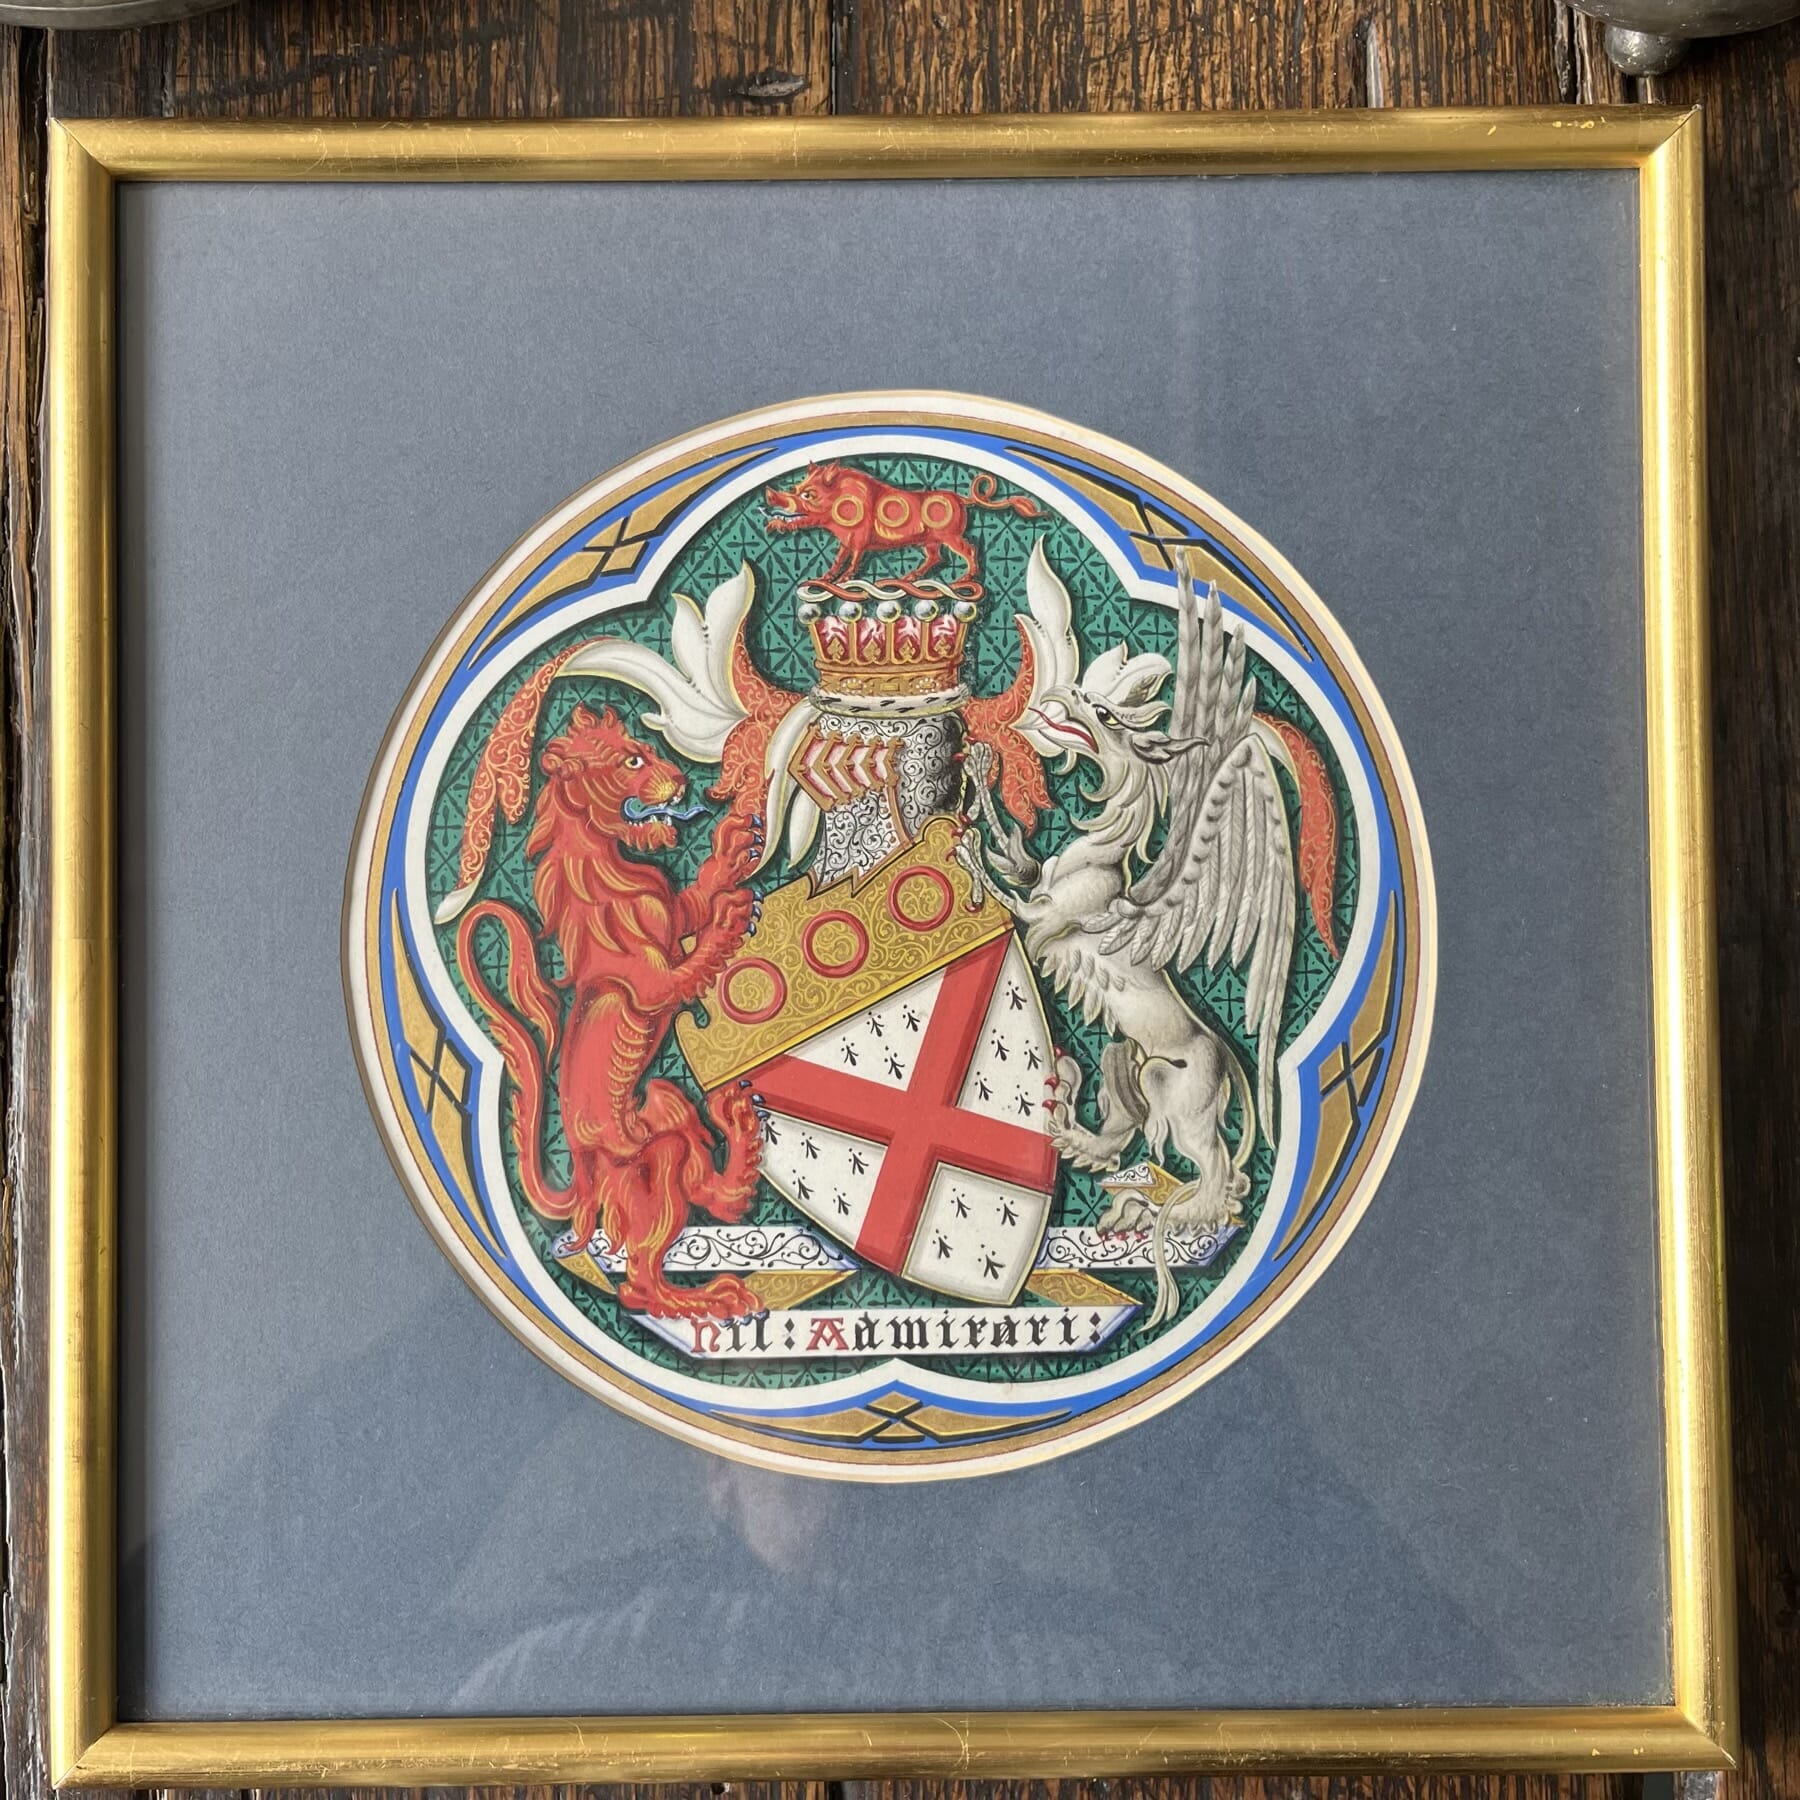 Fitzgibbon Family Crest & Coats of Arms at Moorabool Antiques, Geelong, Australia